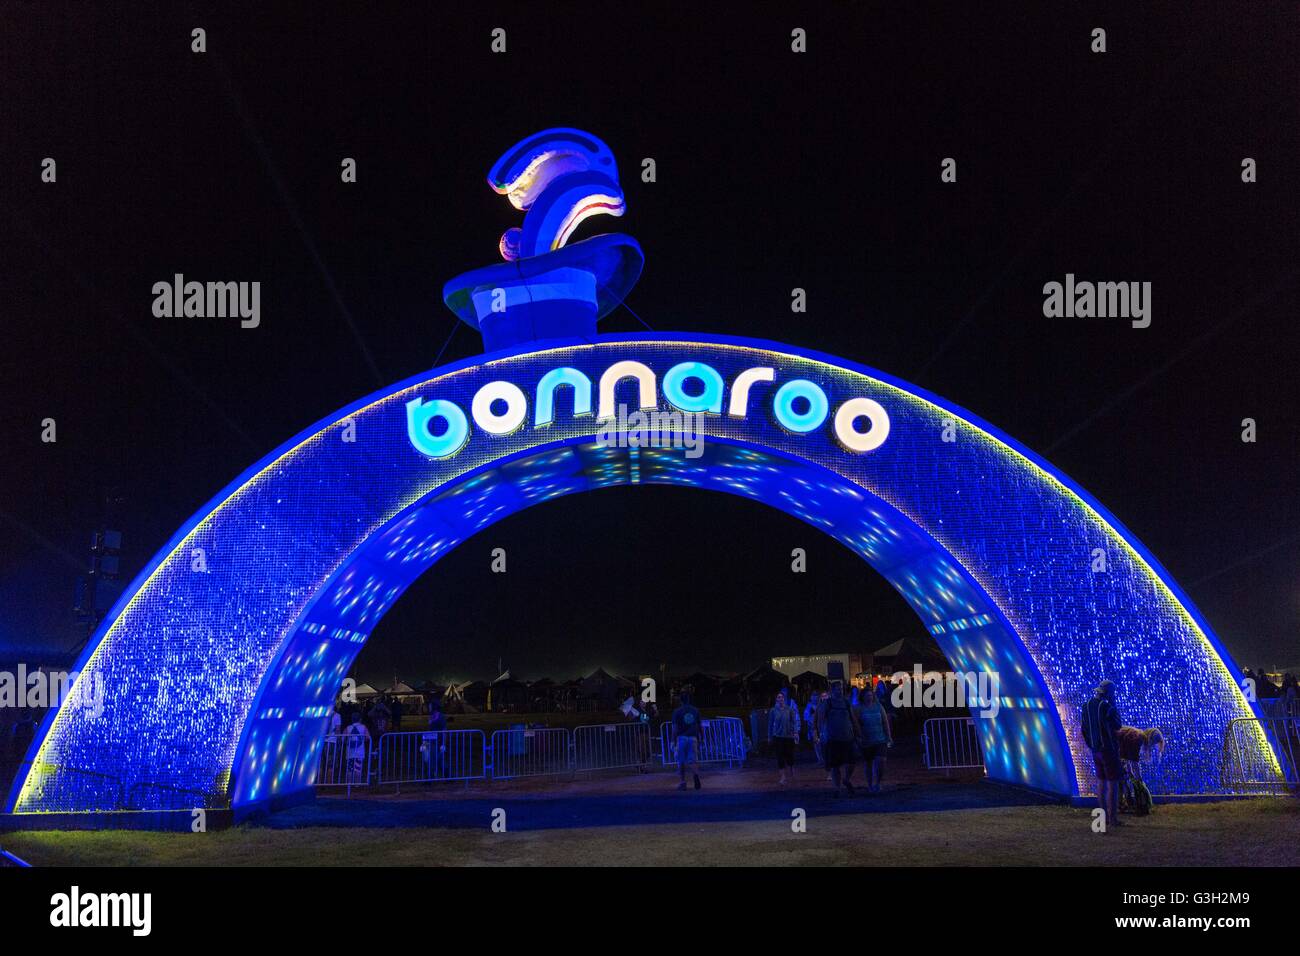 Manchester, Tennessee, USA. 10th June, 2016. Bonnaroo Arch at main entrance to Great Stage Park during Bonnaroo Music and Arts Festival in Manchester, Tennessee © Daniel DeSlover/ZUMA Wire/Alamy Live News Stock Photo